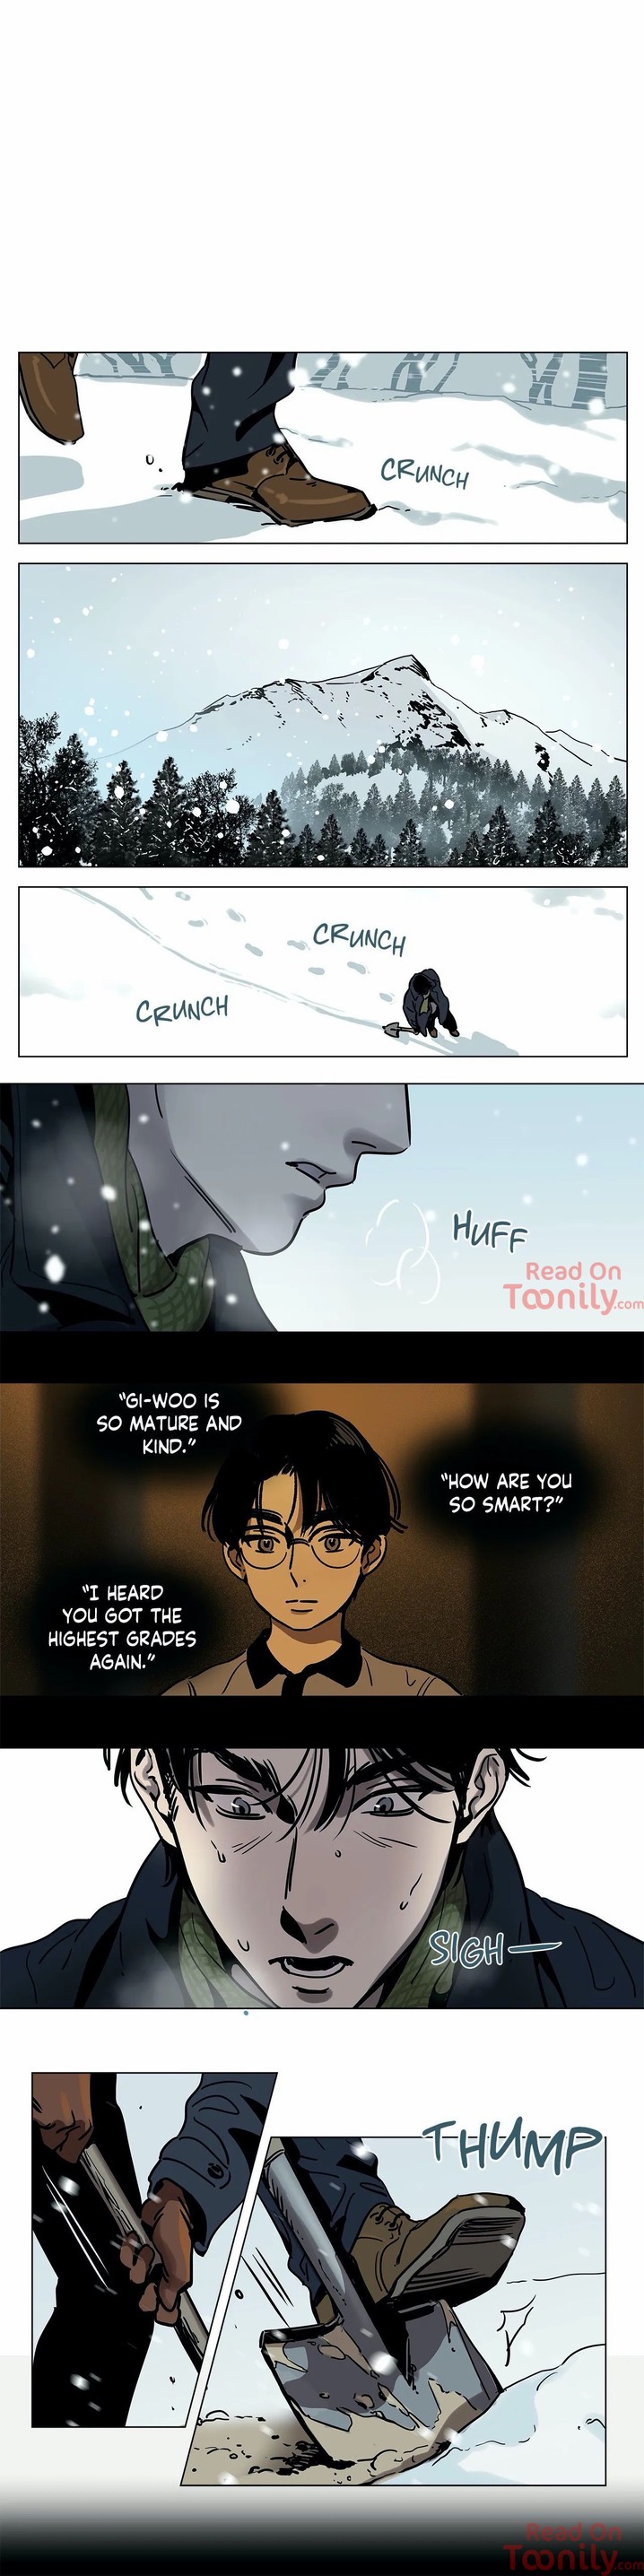 Snowman - Chapter 1 Page 1